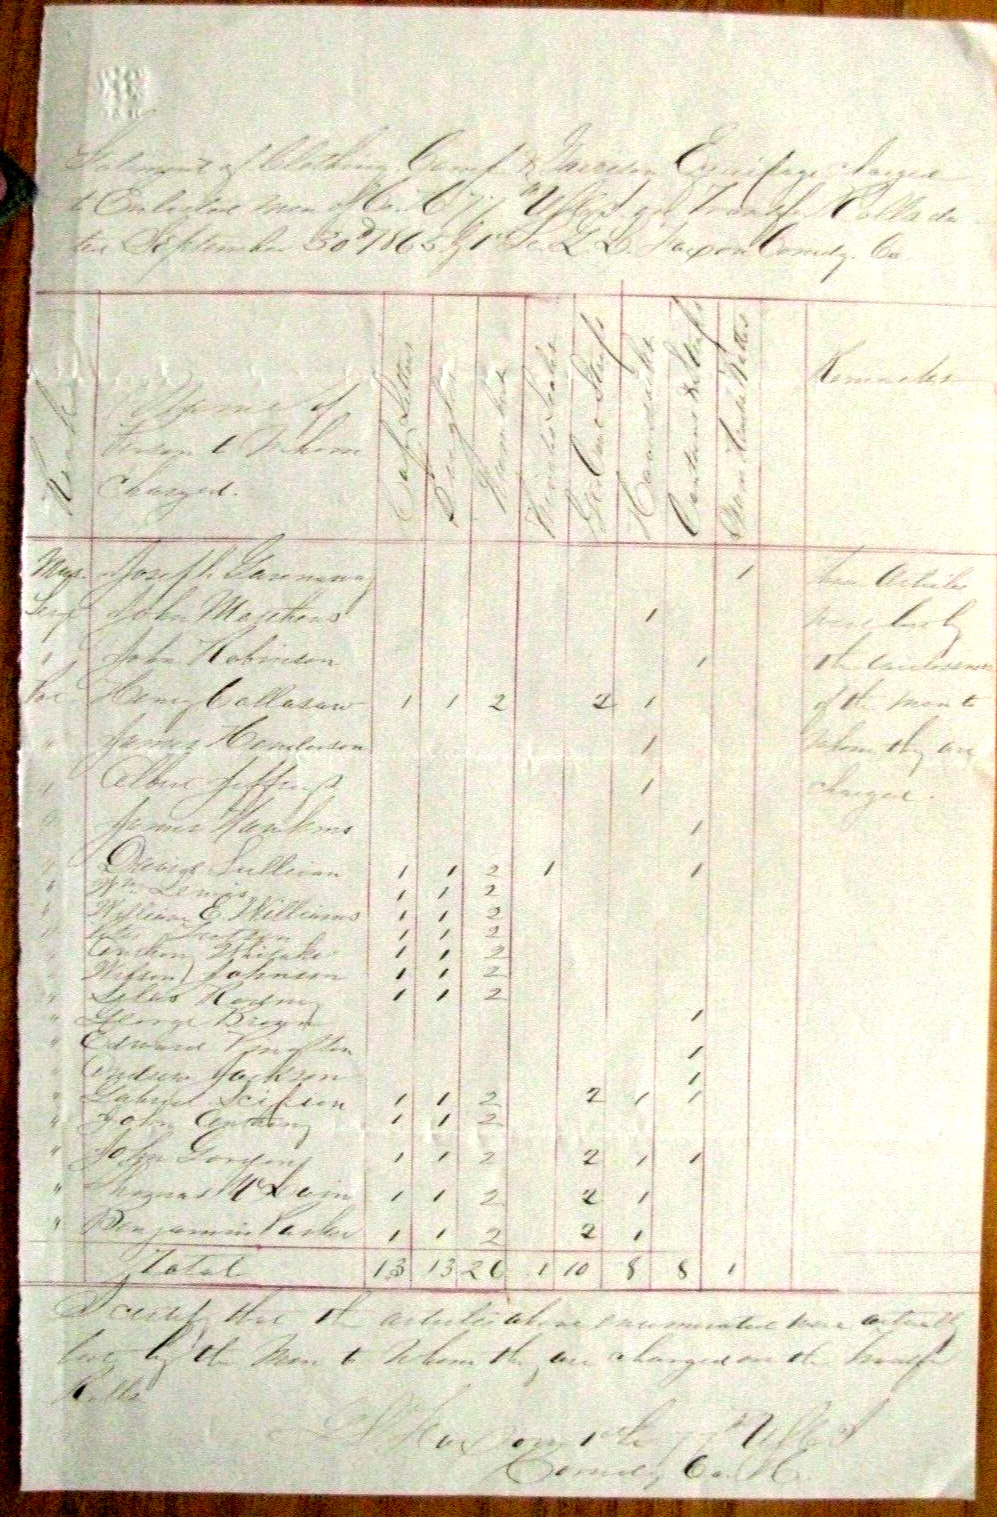 CIVIL WAR US COLORED TROOPS LOUISIANA UNIFORMS ROSTER  1865